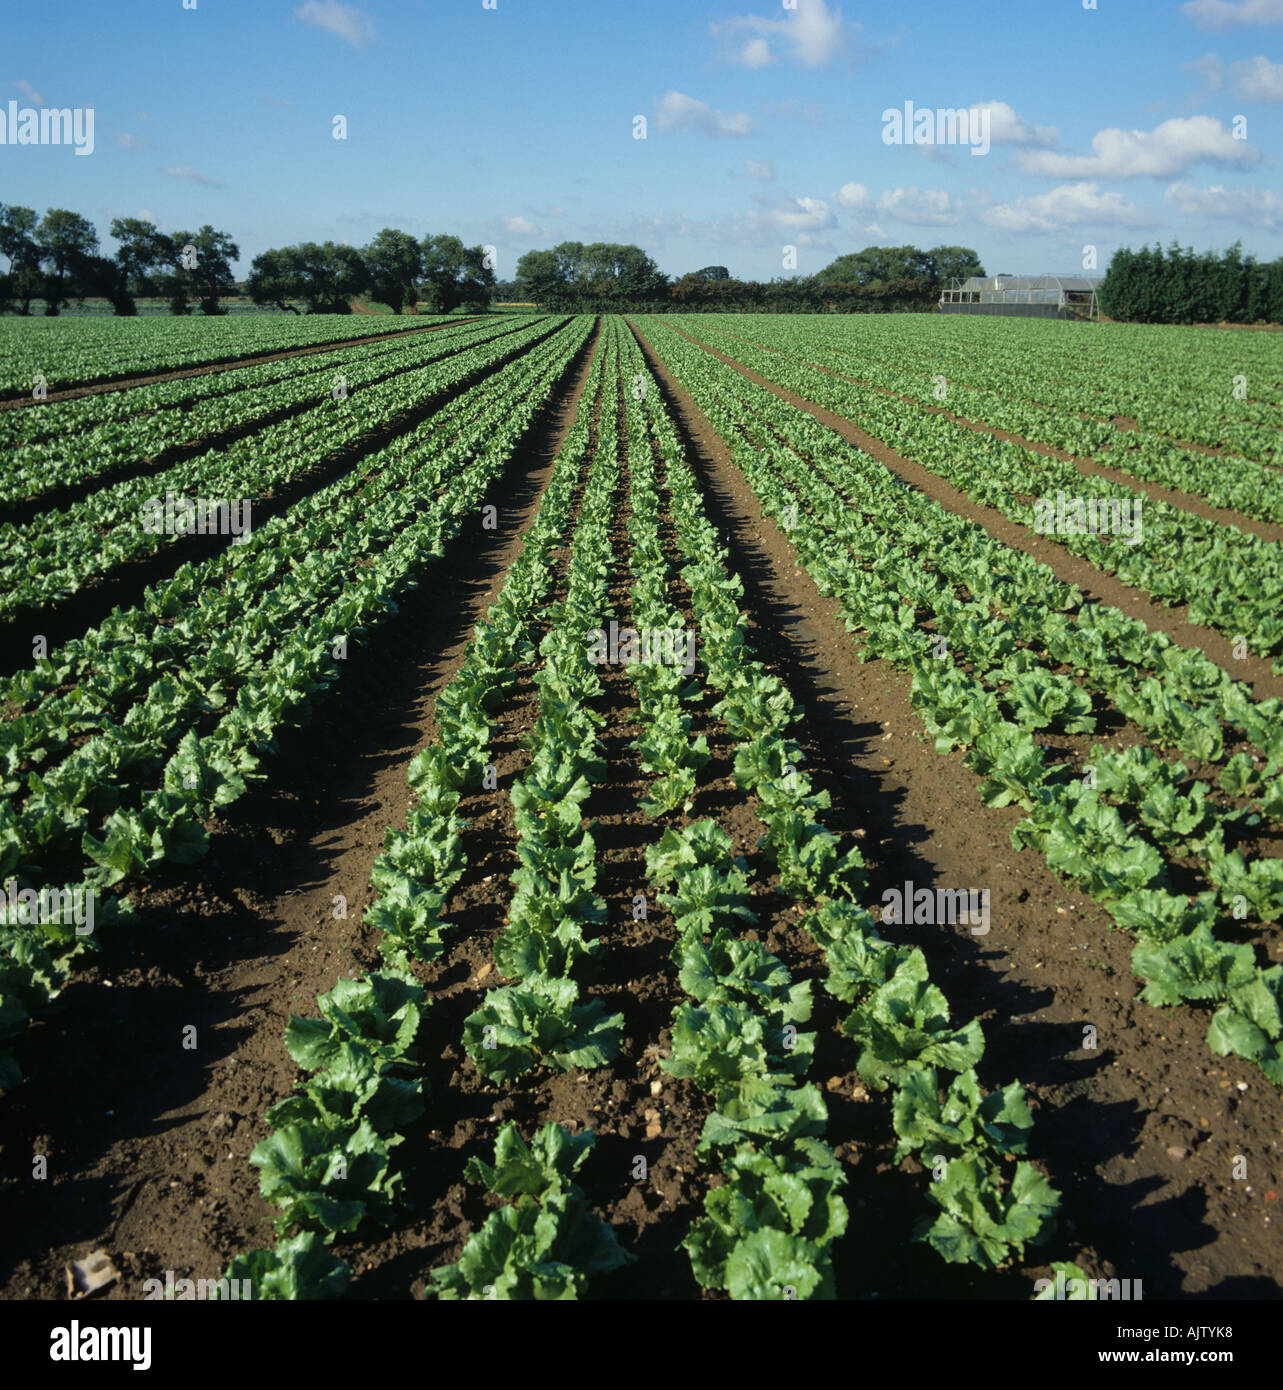 Rows of young lettuces in a crop Berkshire Stock Photo